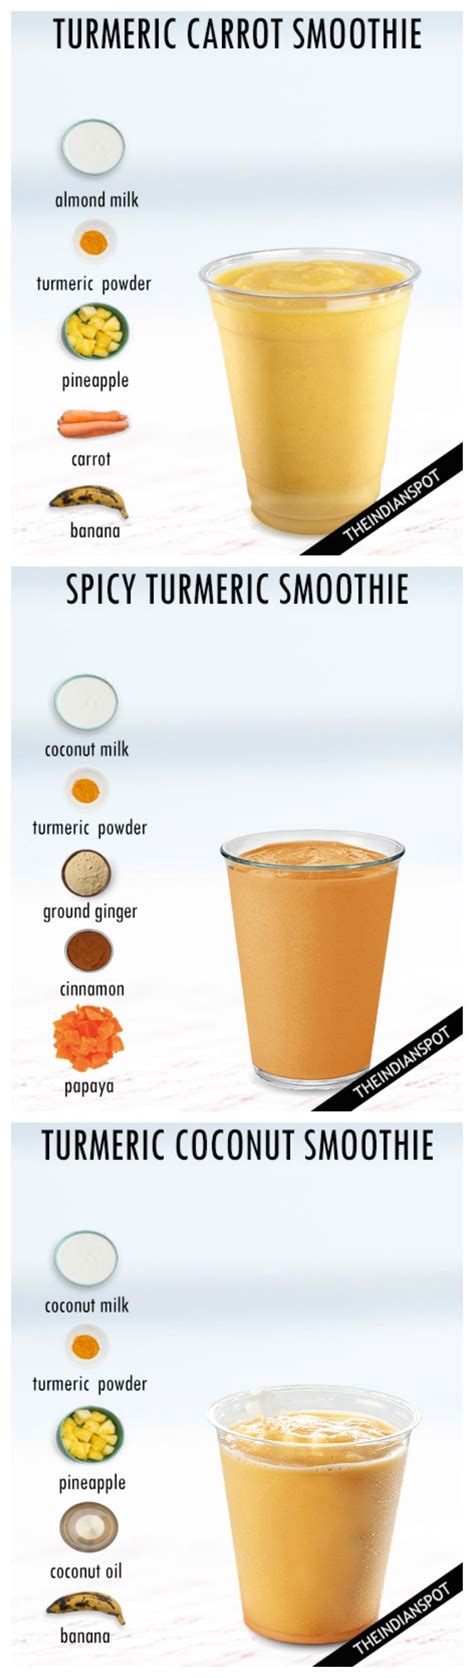 Whatarehealthynutritionfacts Turmeric Smoothie Turmeric Smoothie